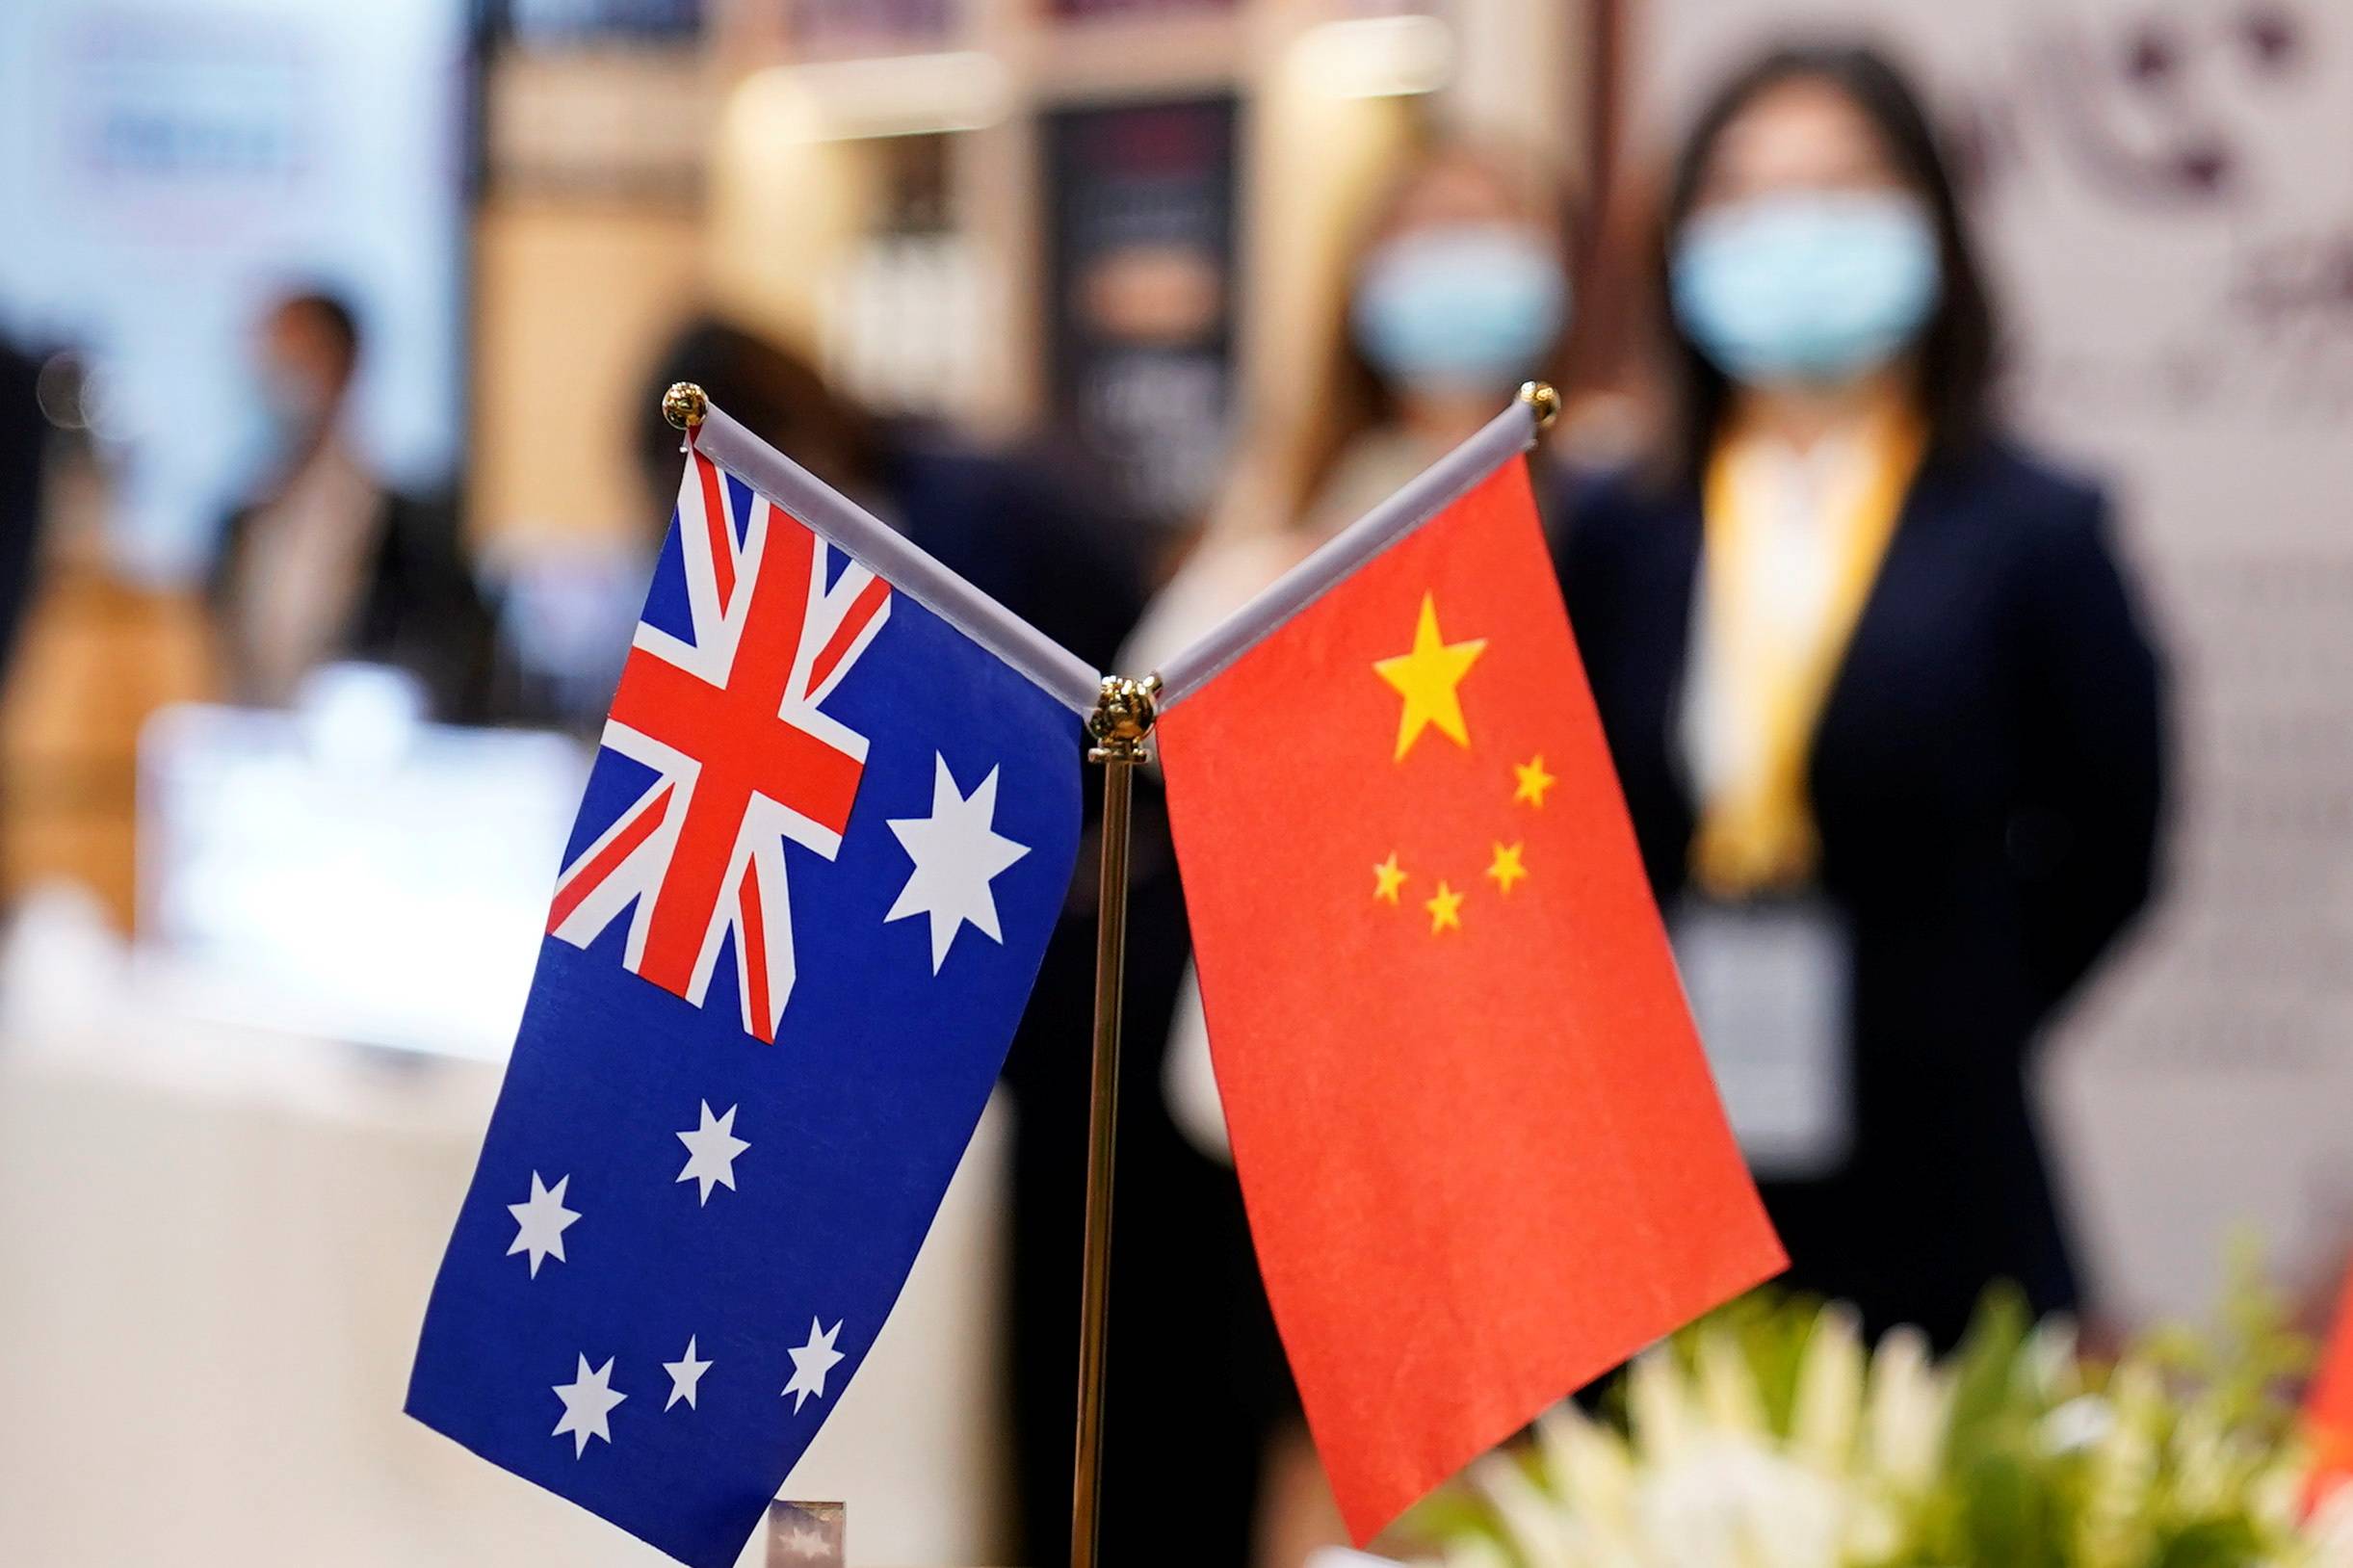 China sees a chance to make headway with Australia under the government of Prime Minister Anthony Albanese, which favors a less confrontational approach to relations than its predecessor. | REUTERS